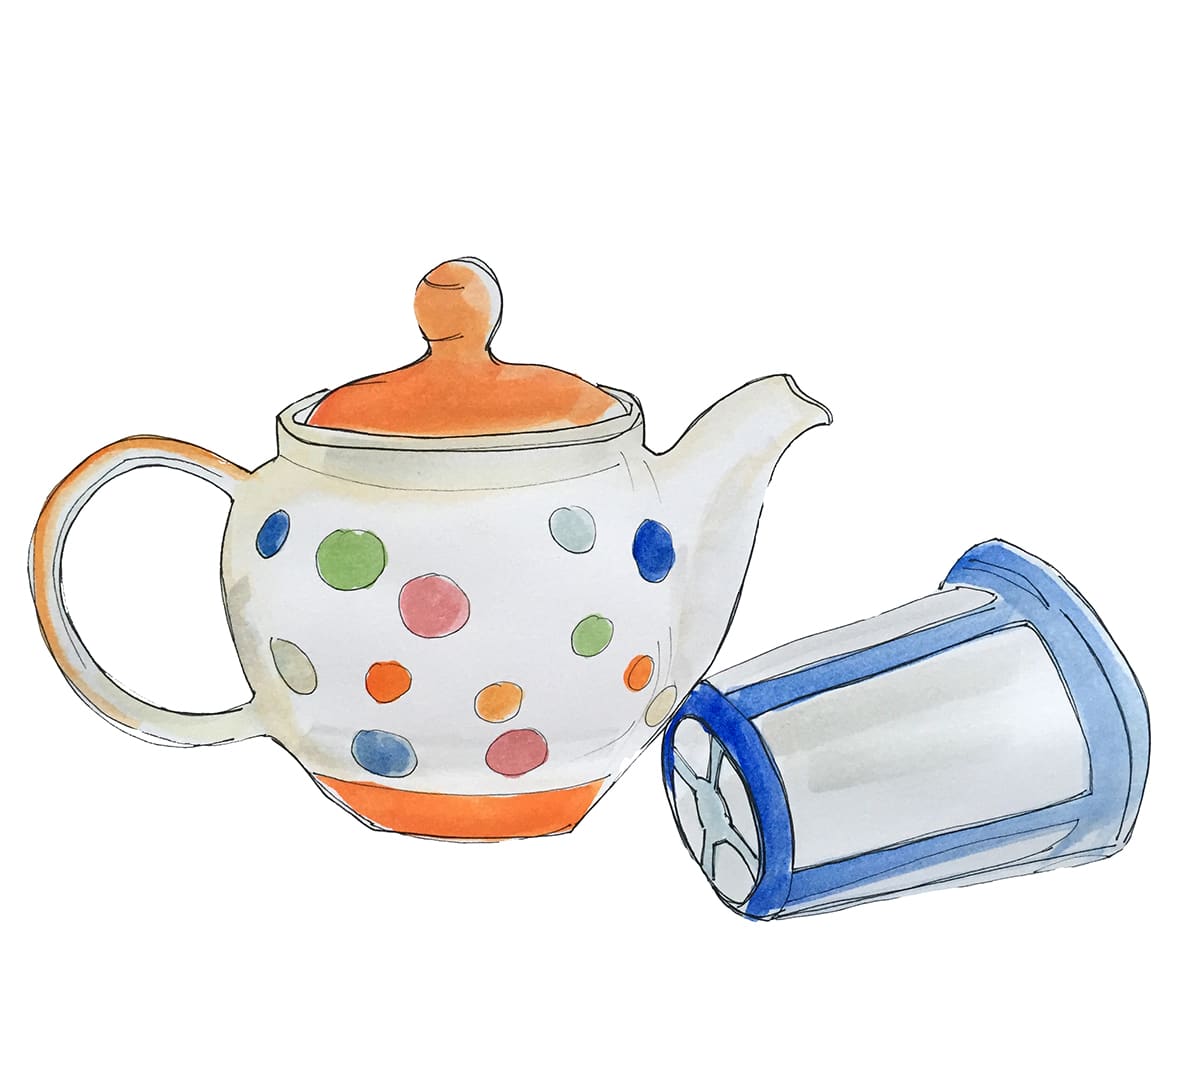 https://boroughmarket.org.uk/wp-content/uploads/2021/05/Tools-of-the-trade-the-teapot-and-strainer-featured.jpg